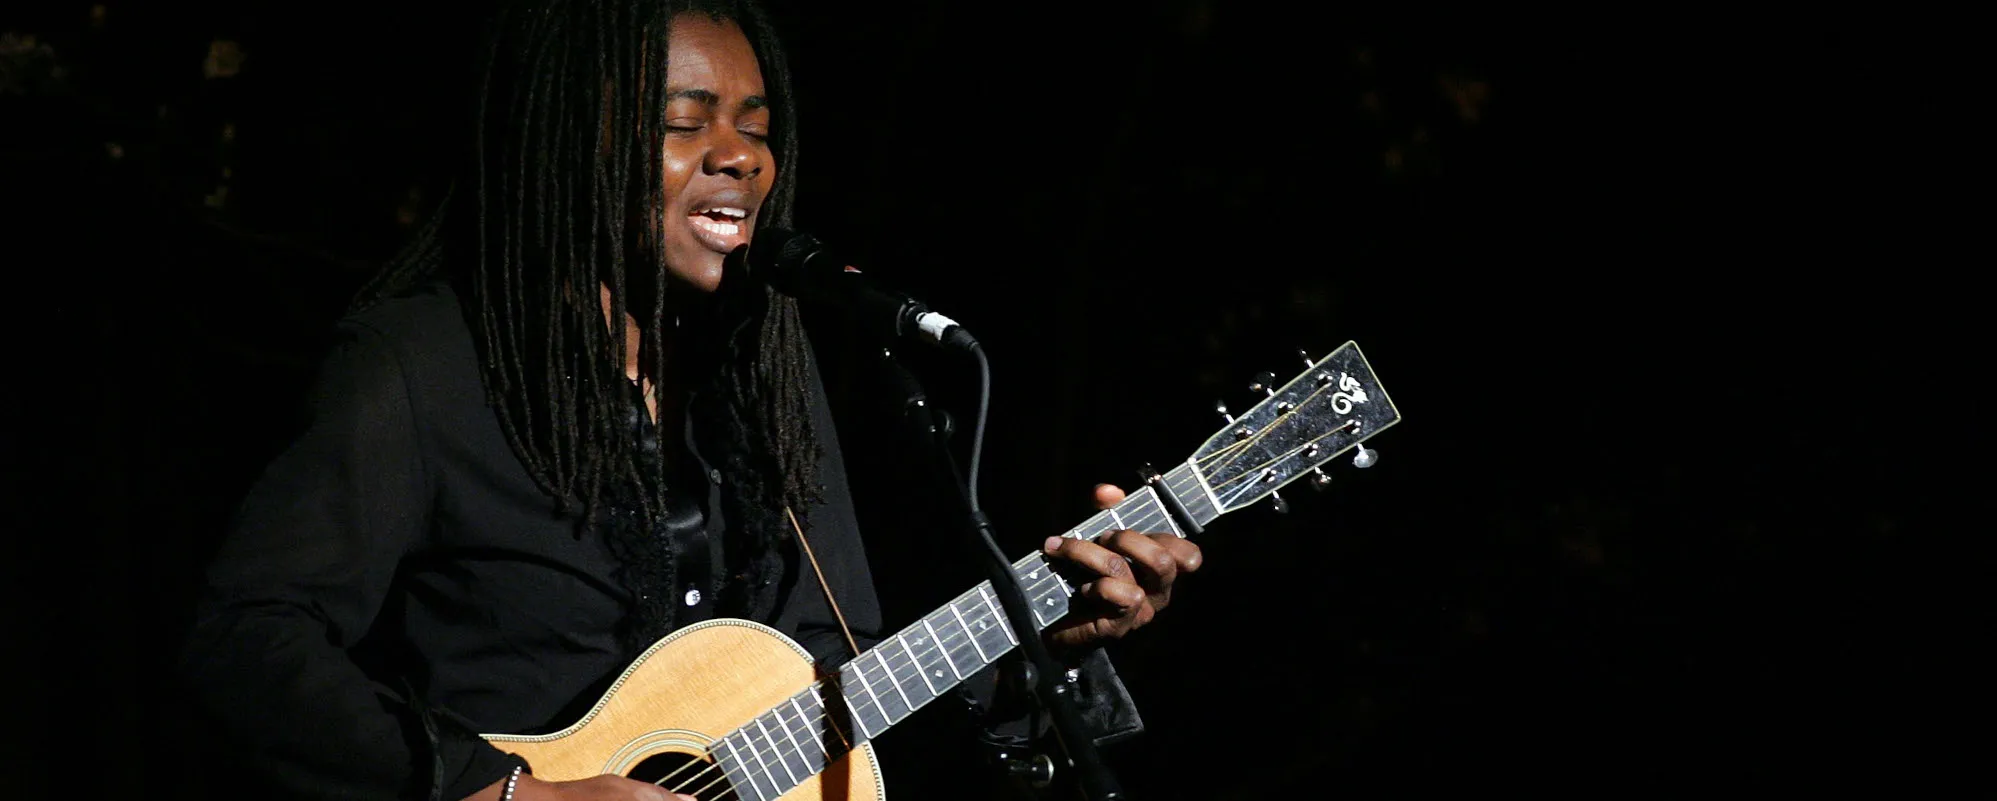 3 Hit Songs You Didn’t Know Tracy Chapman Wrote Solo Besides “Fast Car”